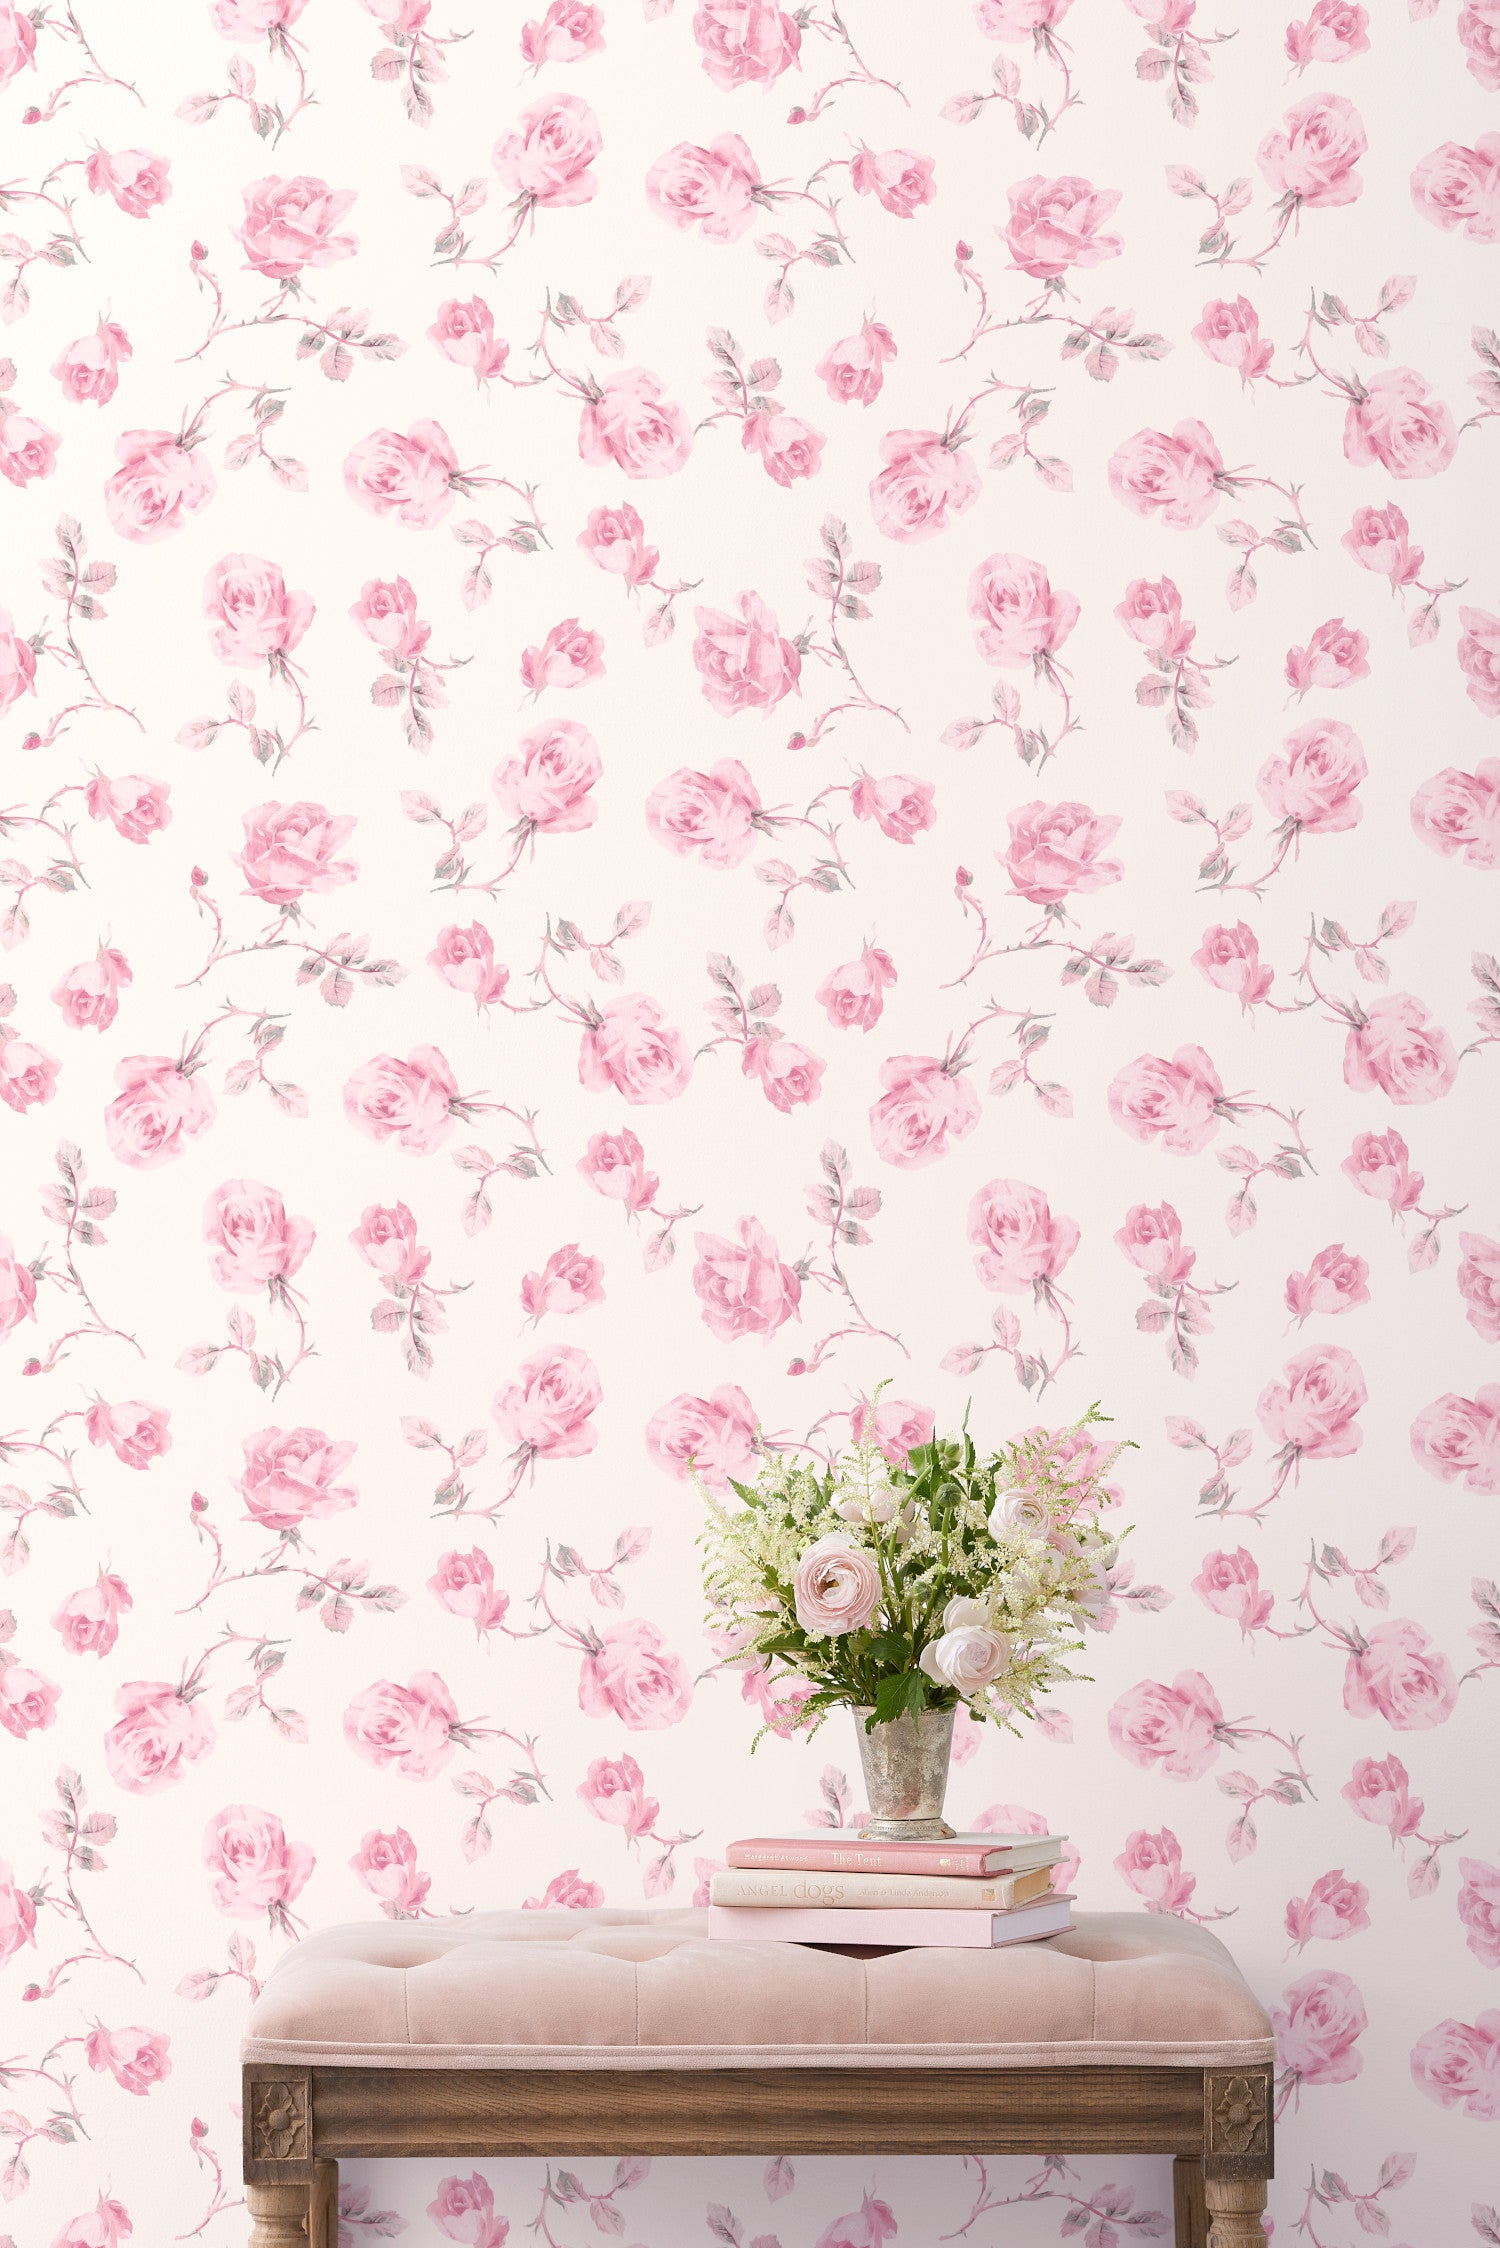 Introducing a delicate rose print wallpaper featuring a soft pink background. This wallpaper exudes elegance with its large, intricately detailed roses.